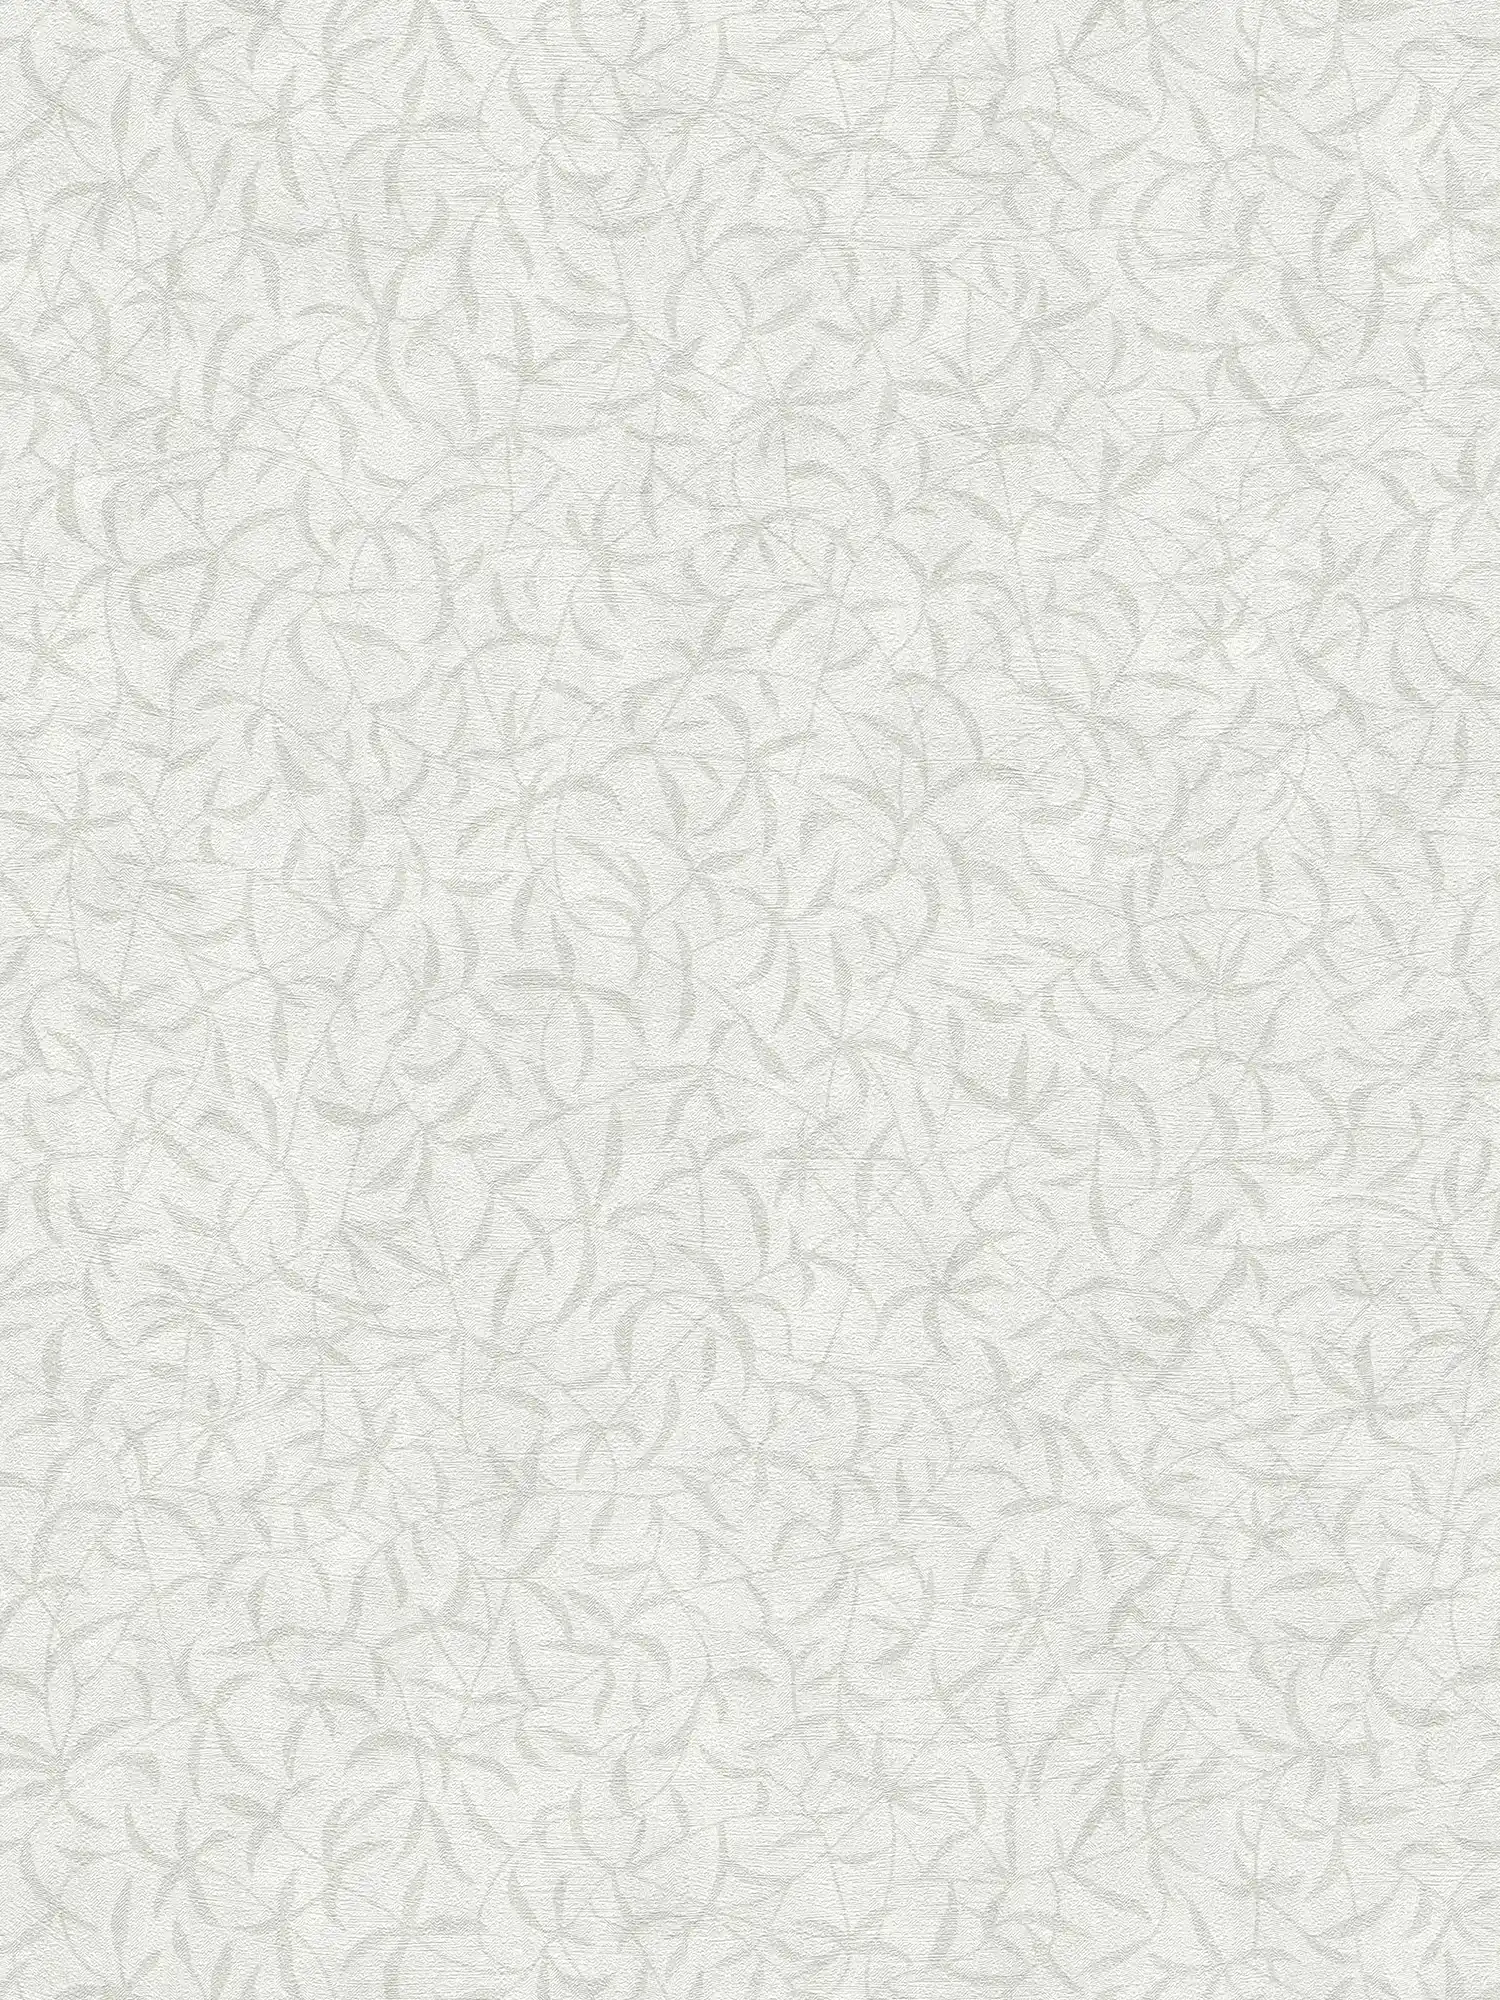 Non-woven wallpaper floral branches with structure - white, grey
